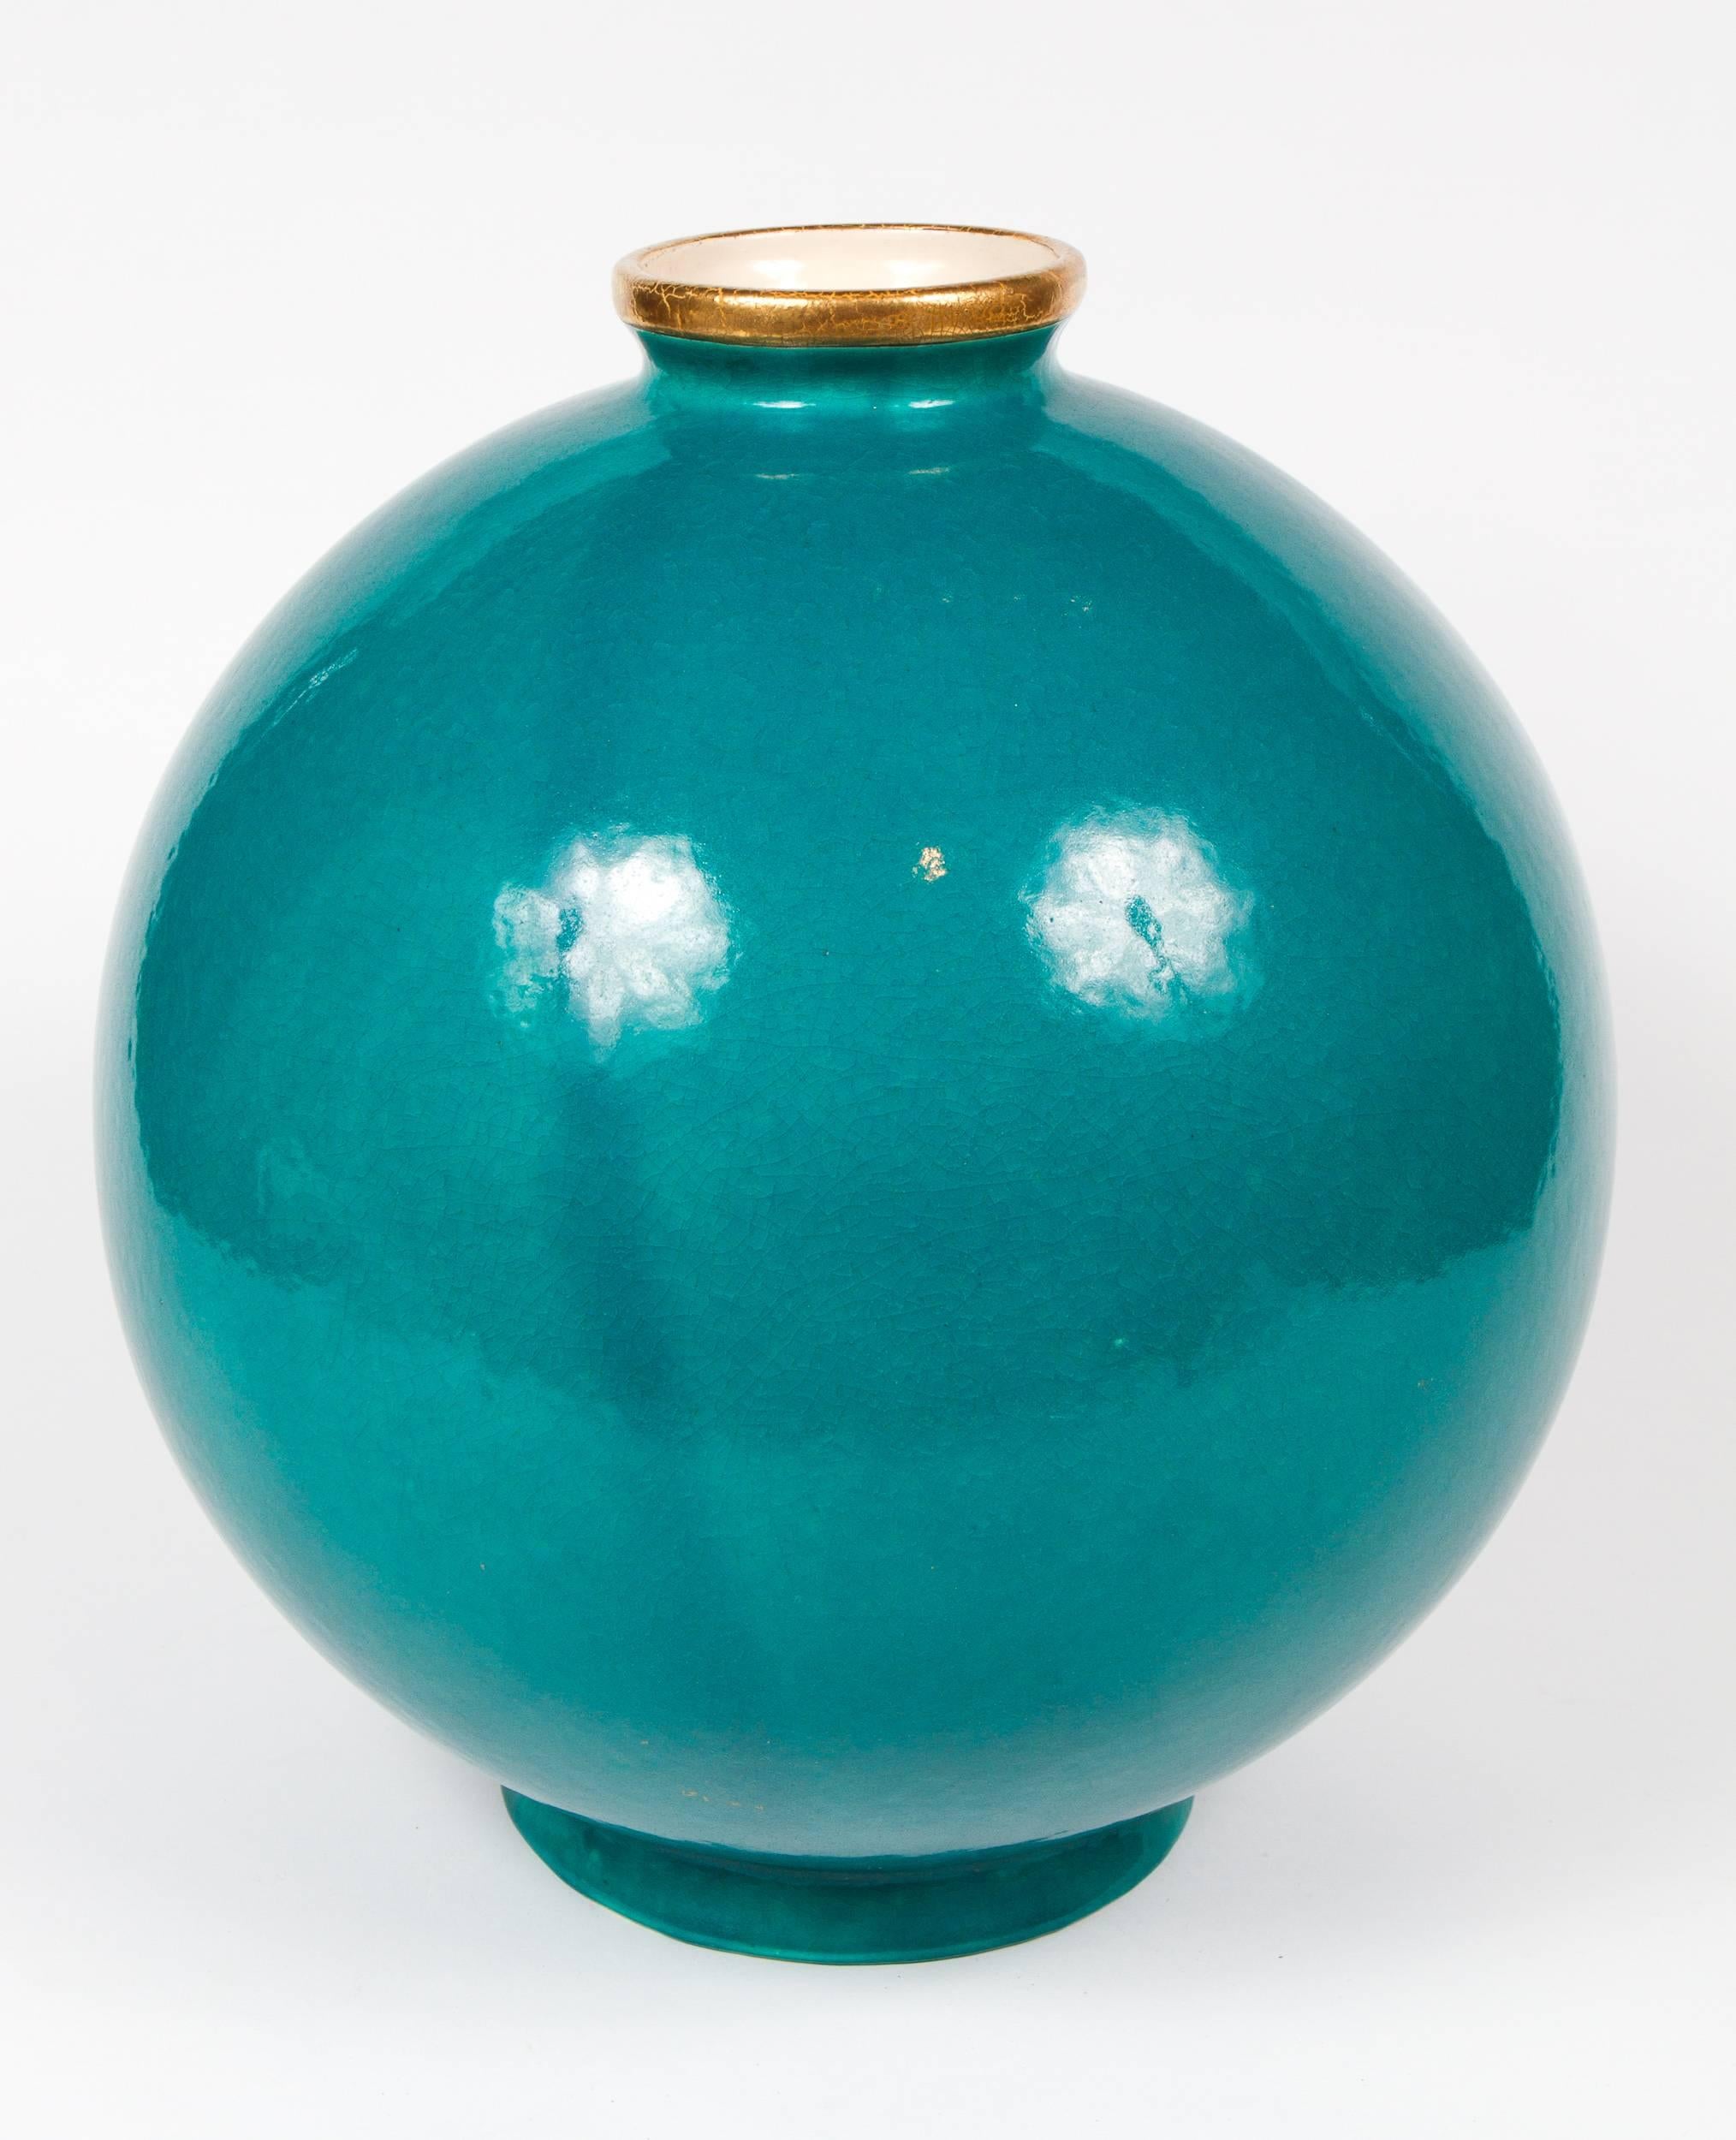 Important turquoise blue crackled glazed ceramic vase by Longwy for Maison Jansen, the upper rim decorated with gold leaf. Marked: 